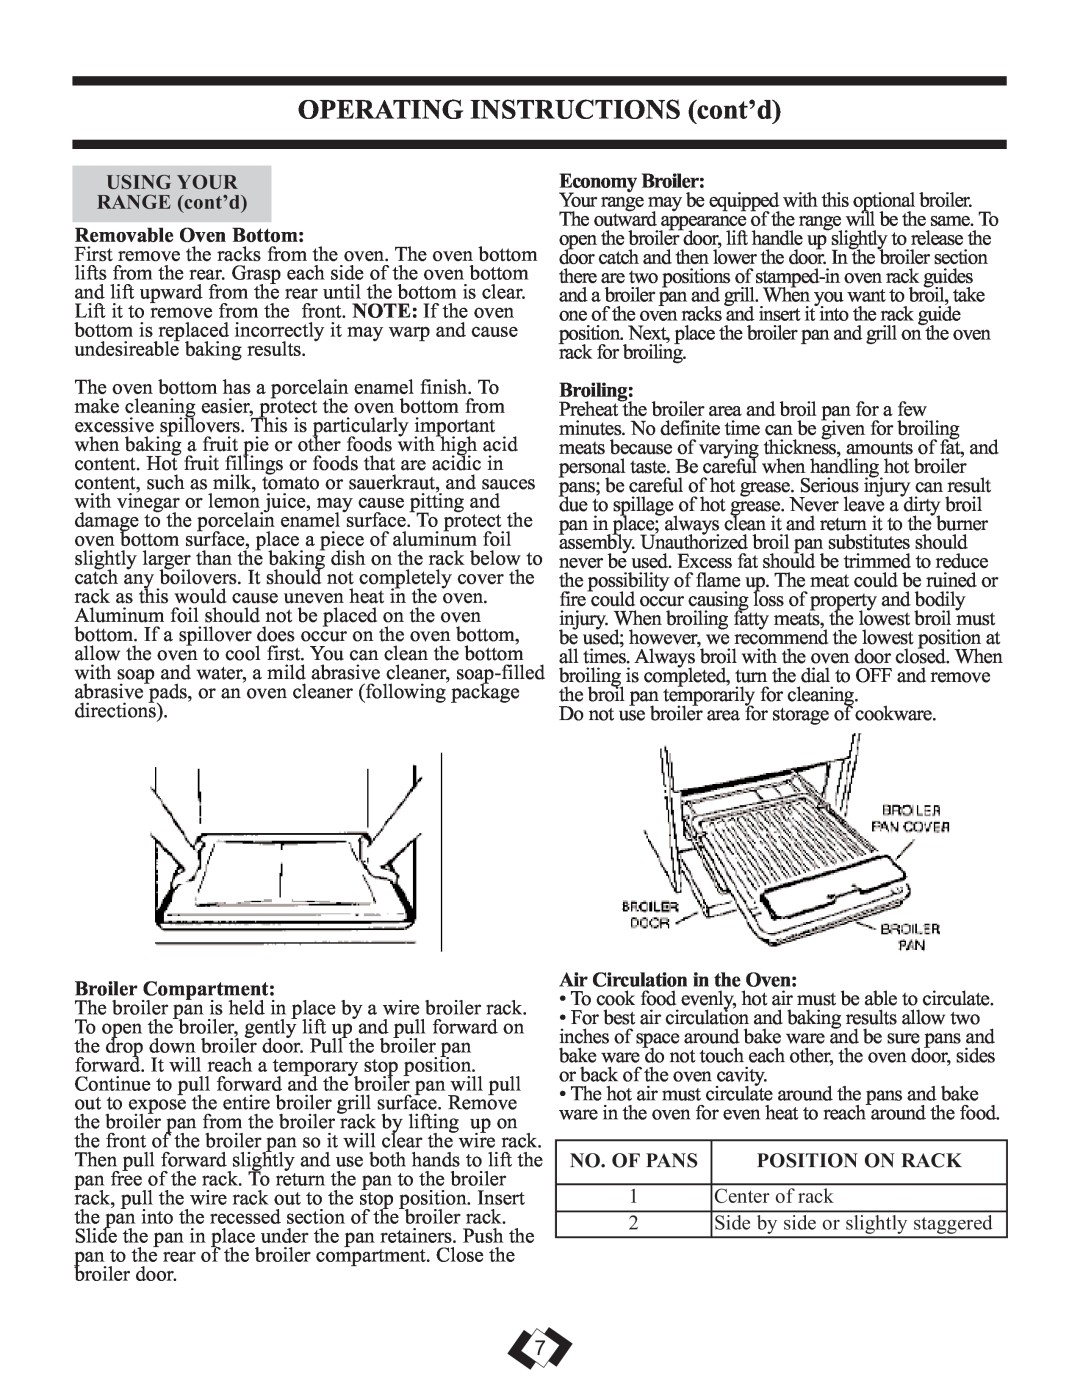 Danby DR3009WGLP OPERATING INSTRUCTIONS cont’d, USING YOUR RANGE cont’d Removable Oven Bottom, Broiler Compartment 